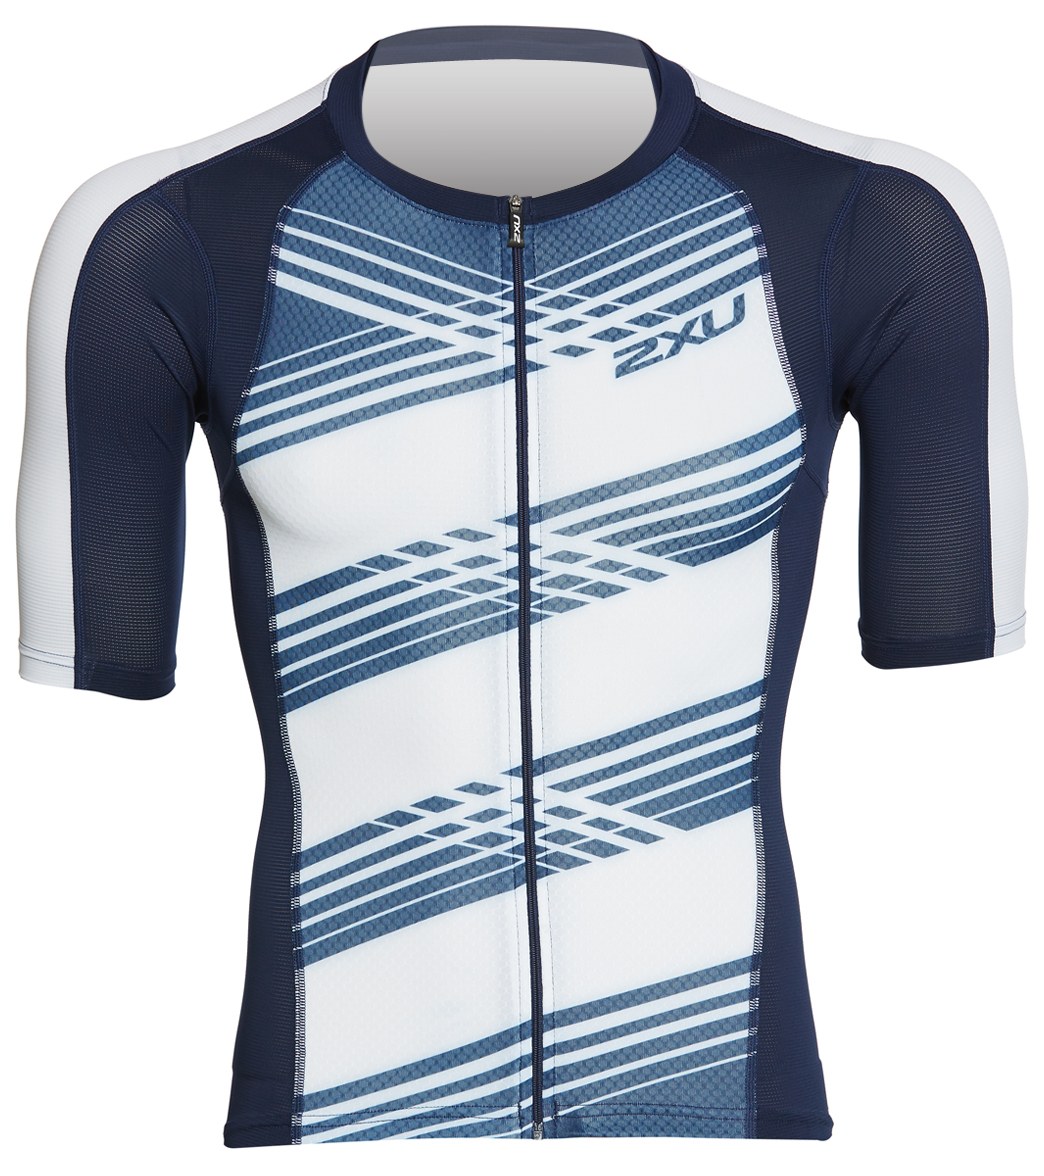 2Xu Men's Compression Sleeved Tri Top - Navy/Navy White Lines Small - Swimoutlet.com